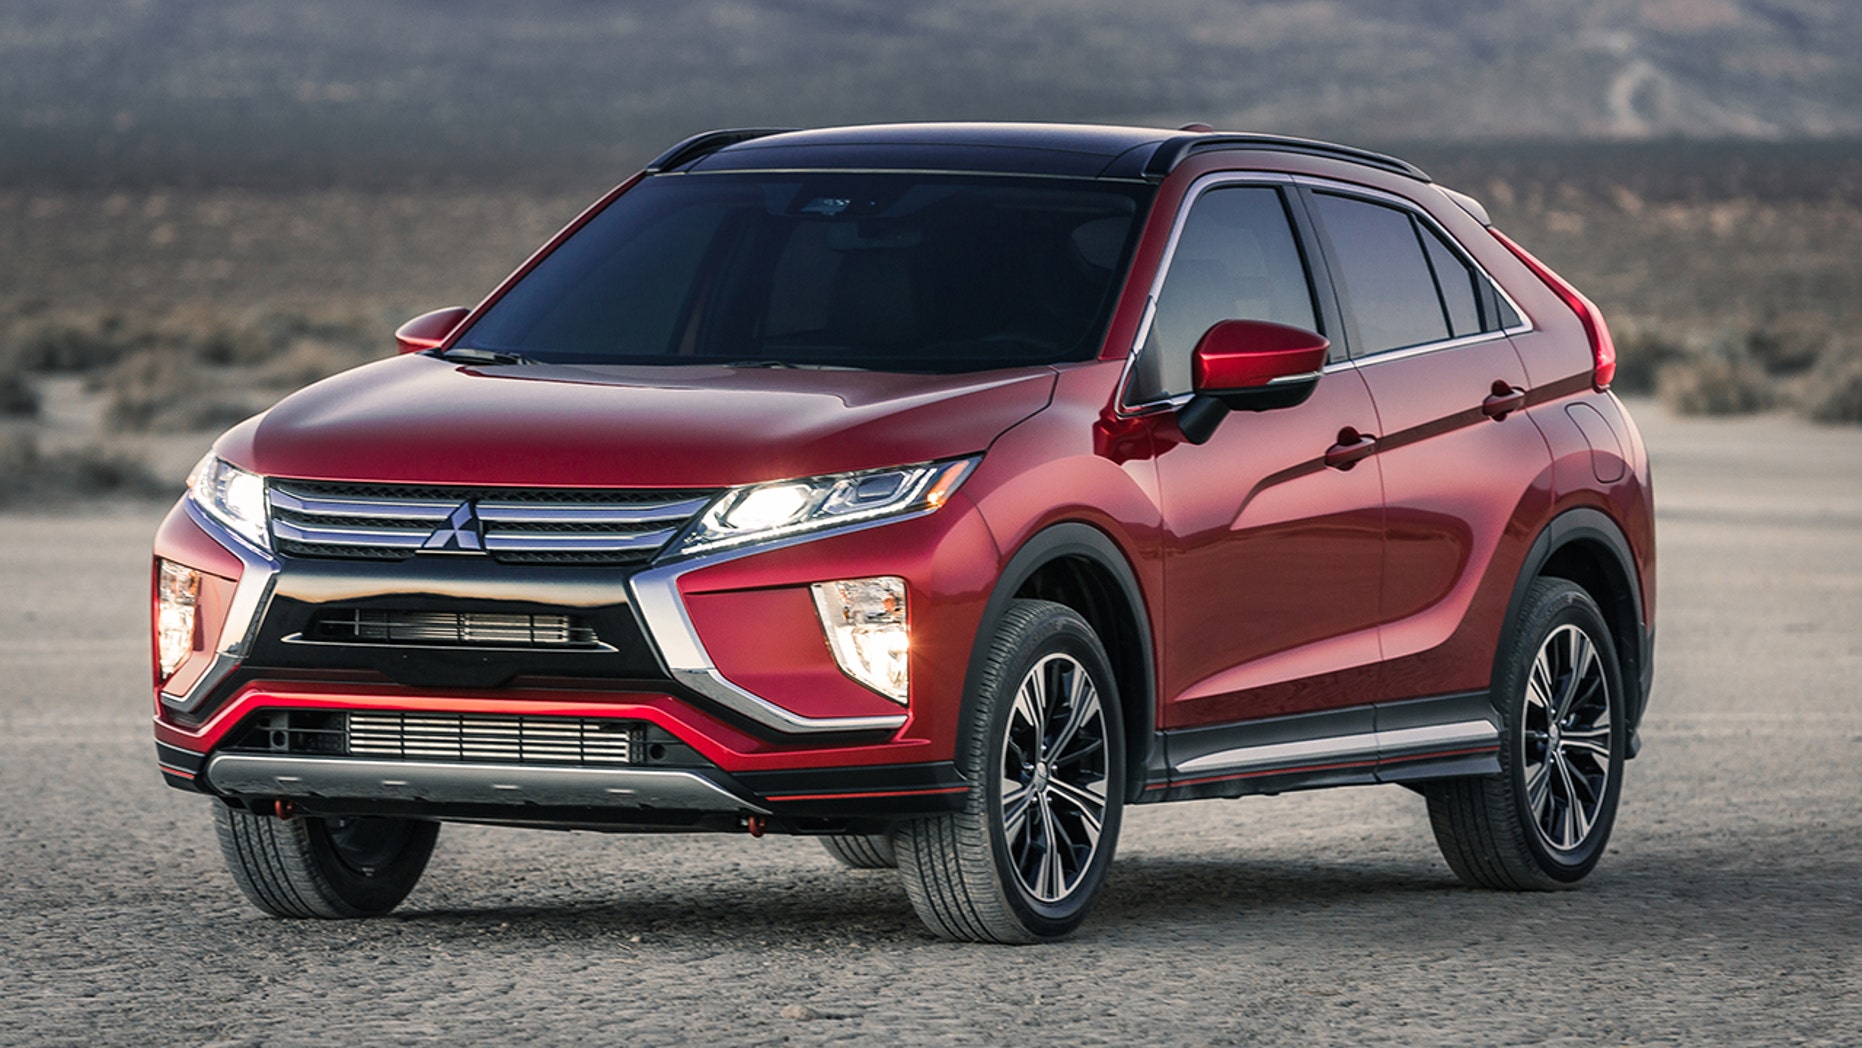 The 2018 Mitsubishi Eclipse Cross proves times have